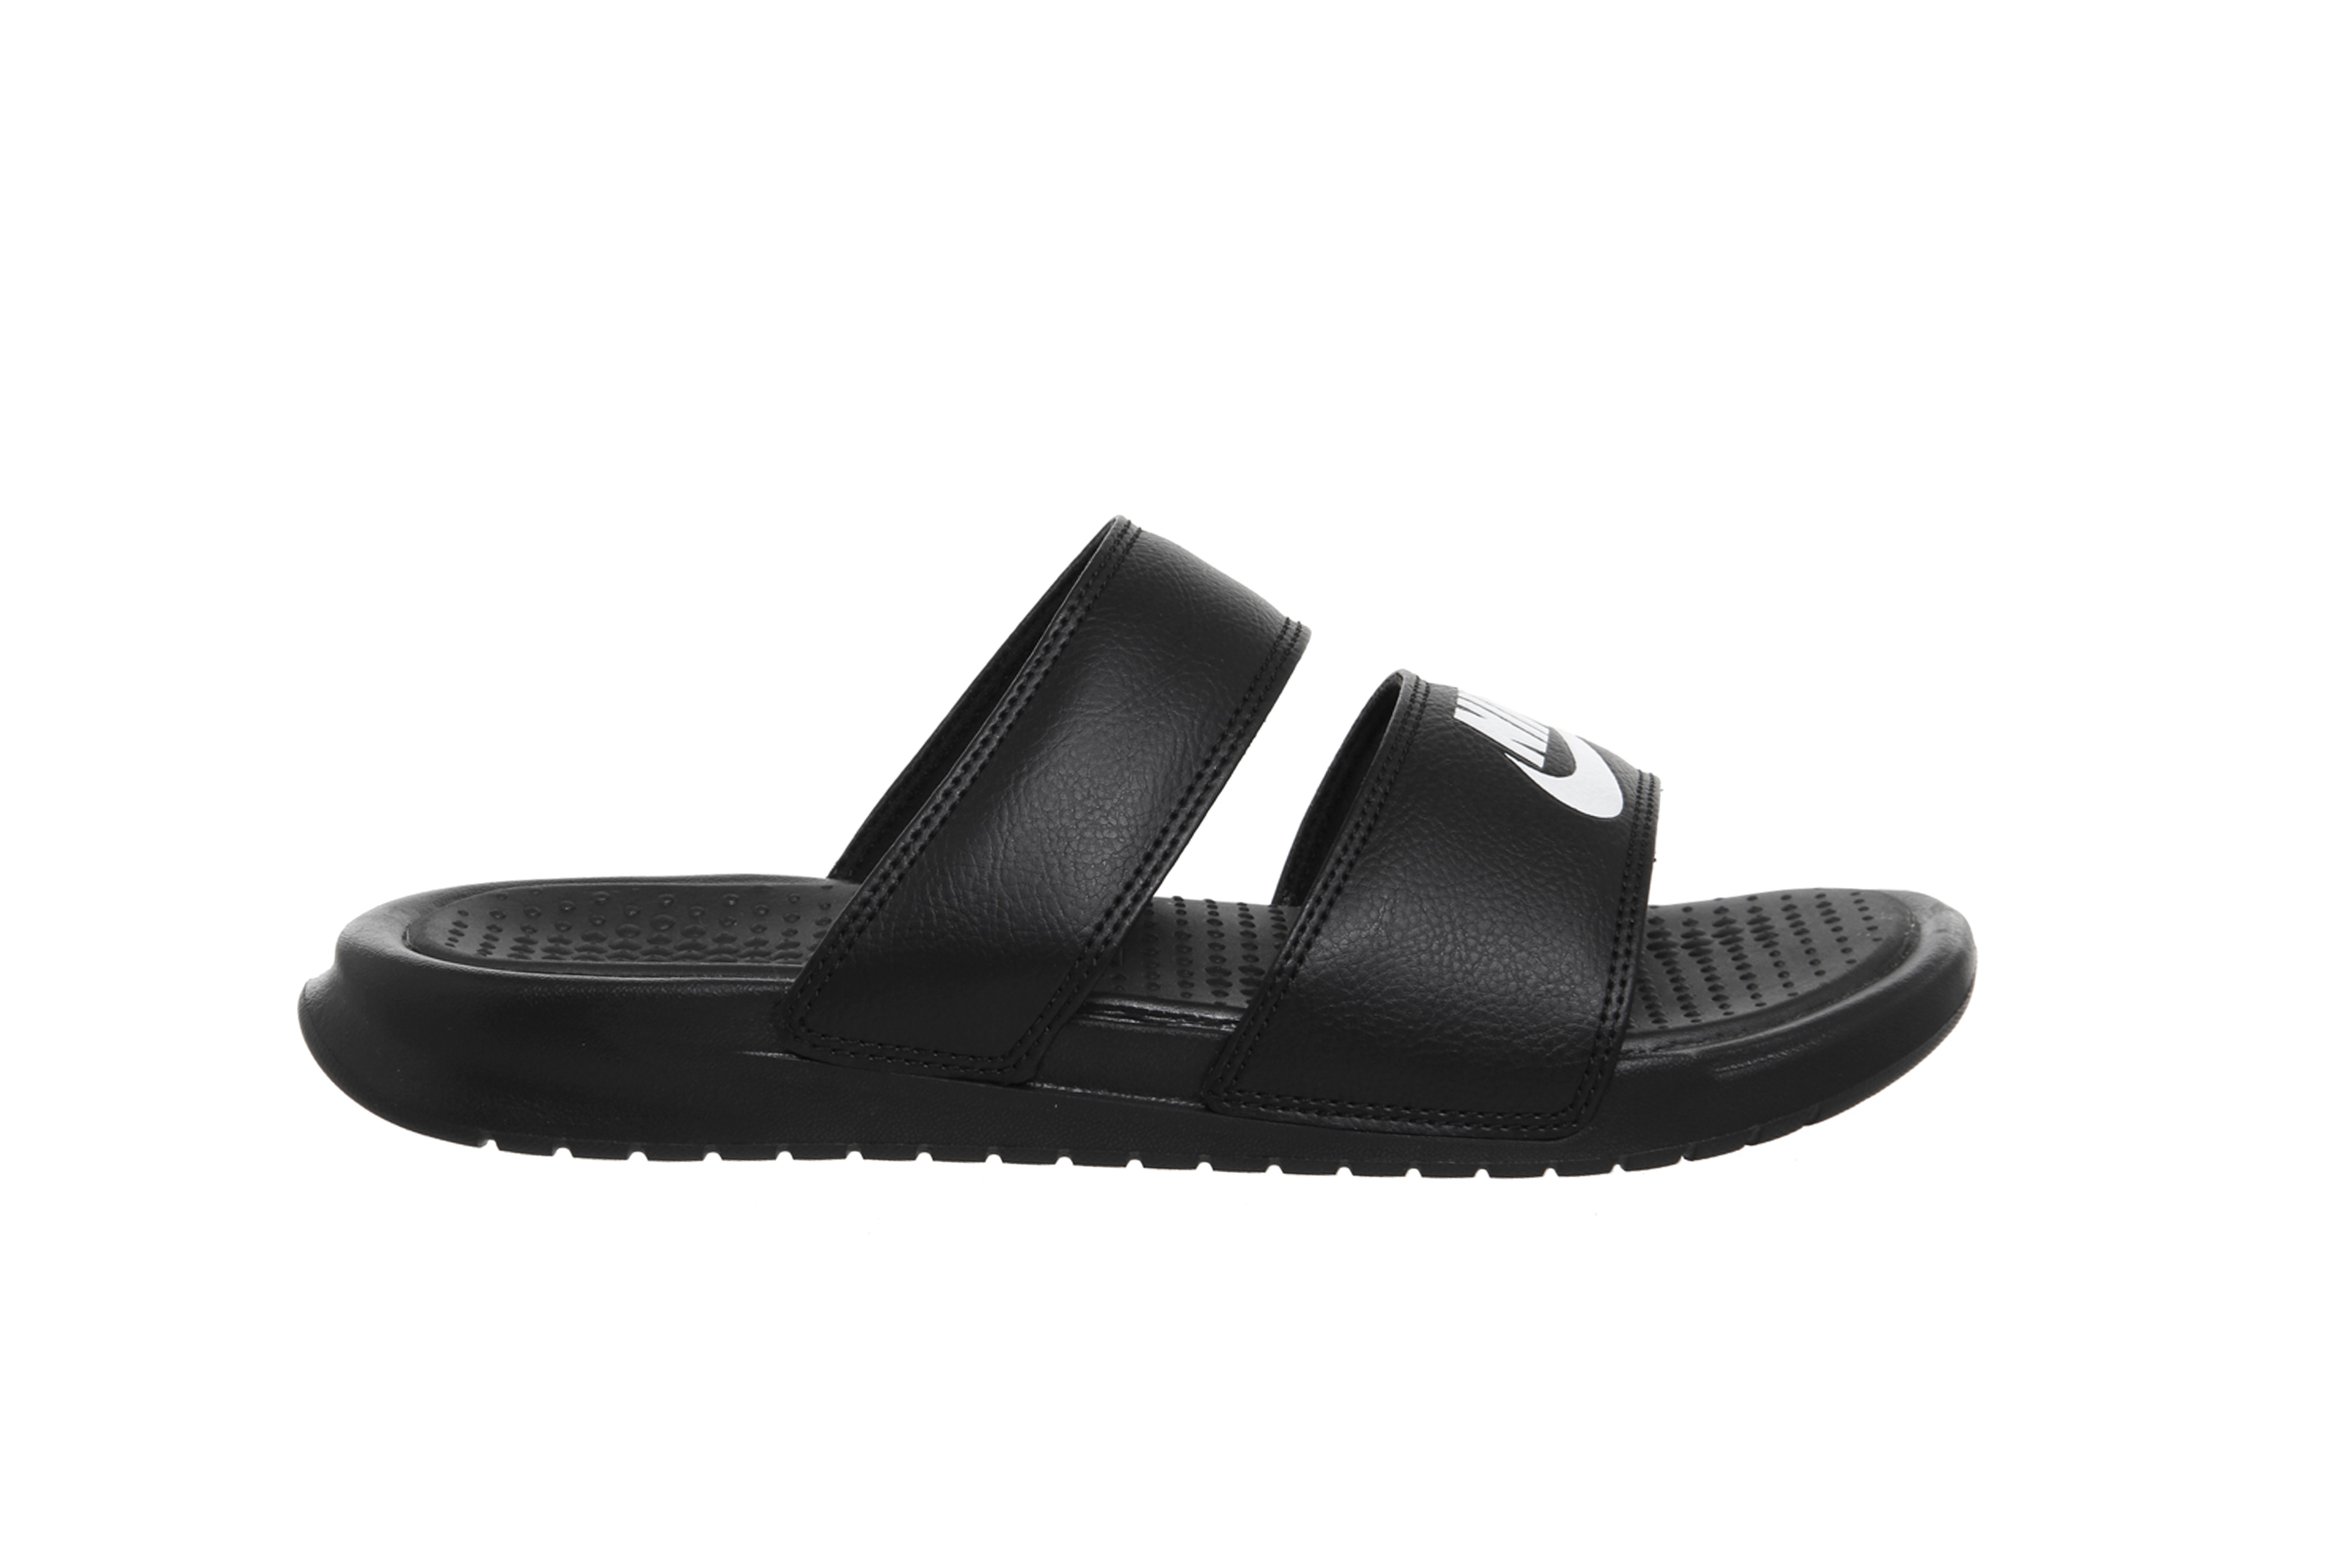 Nike Summer Double Strap Slides in White/Black Sandals Shoes